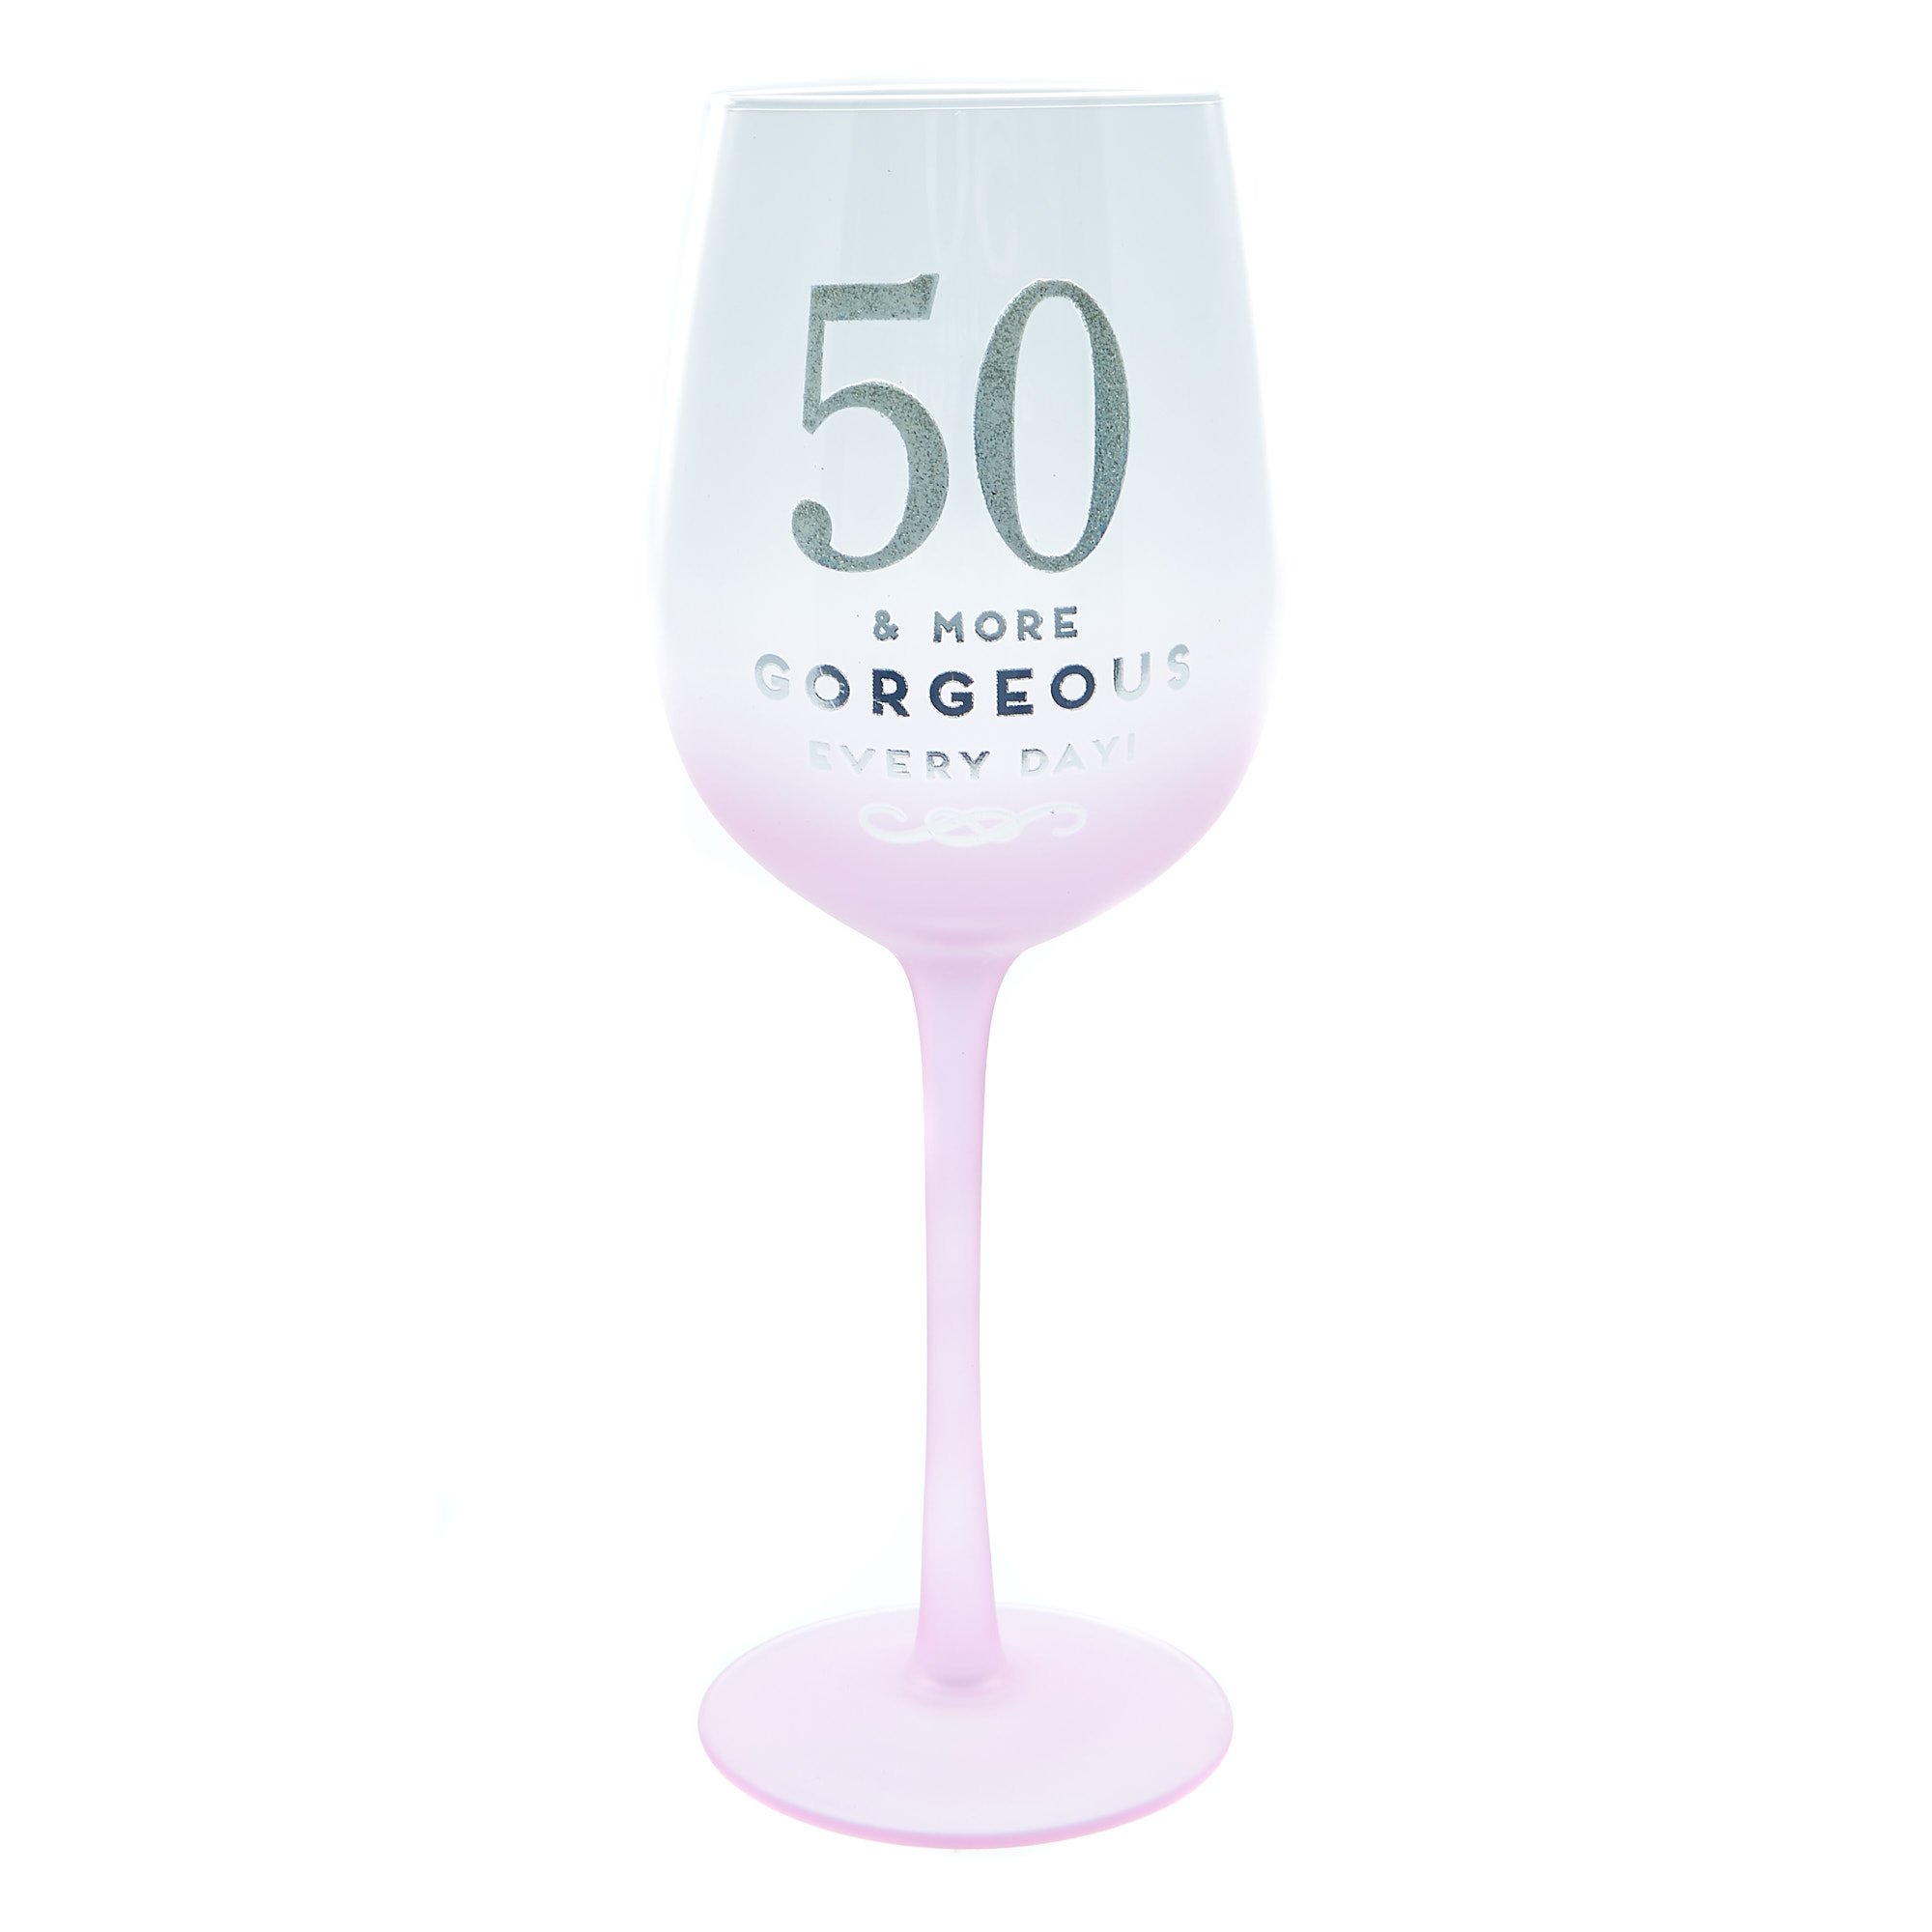 50th Birthday Wine Glass - More Gorgeous Every Day!